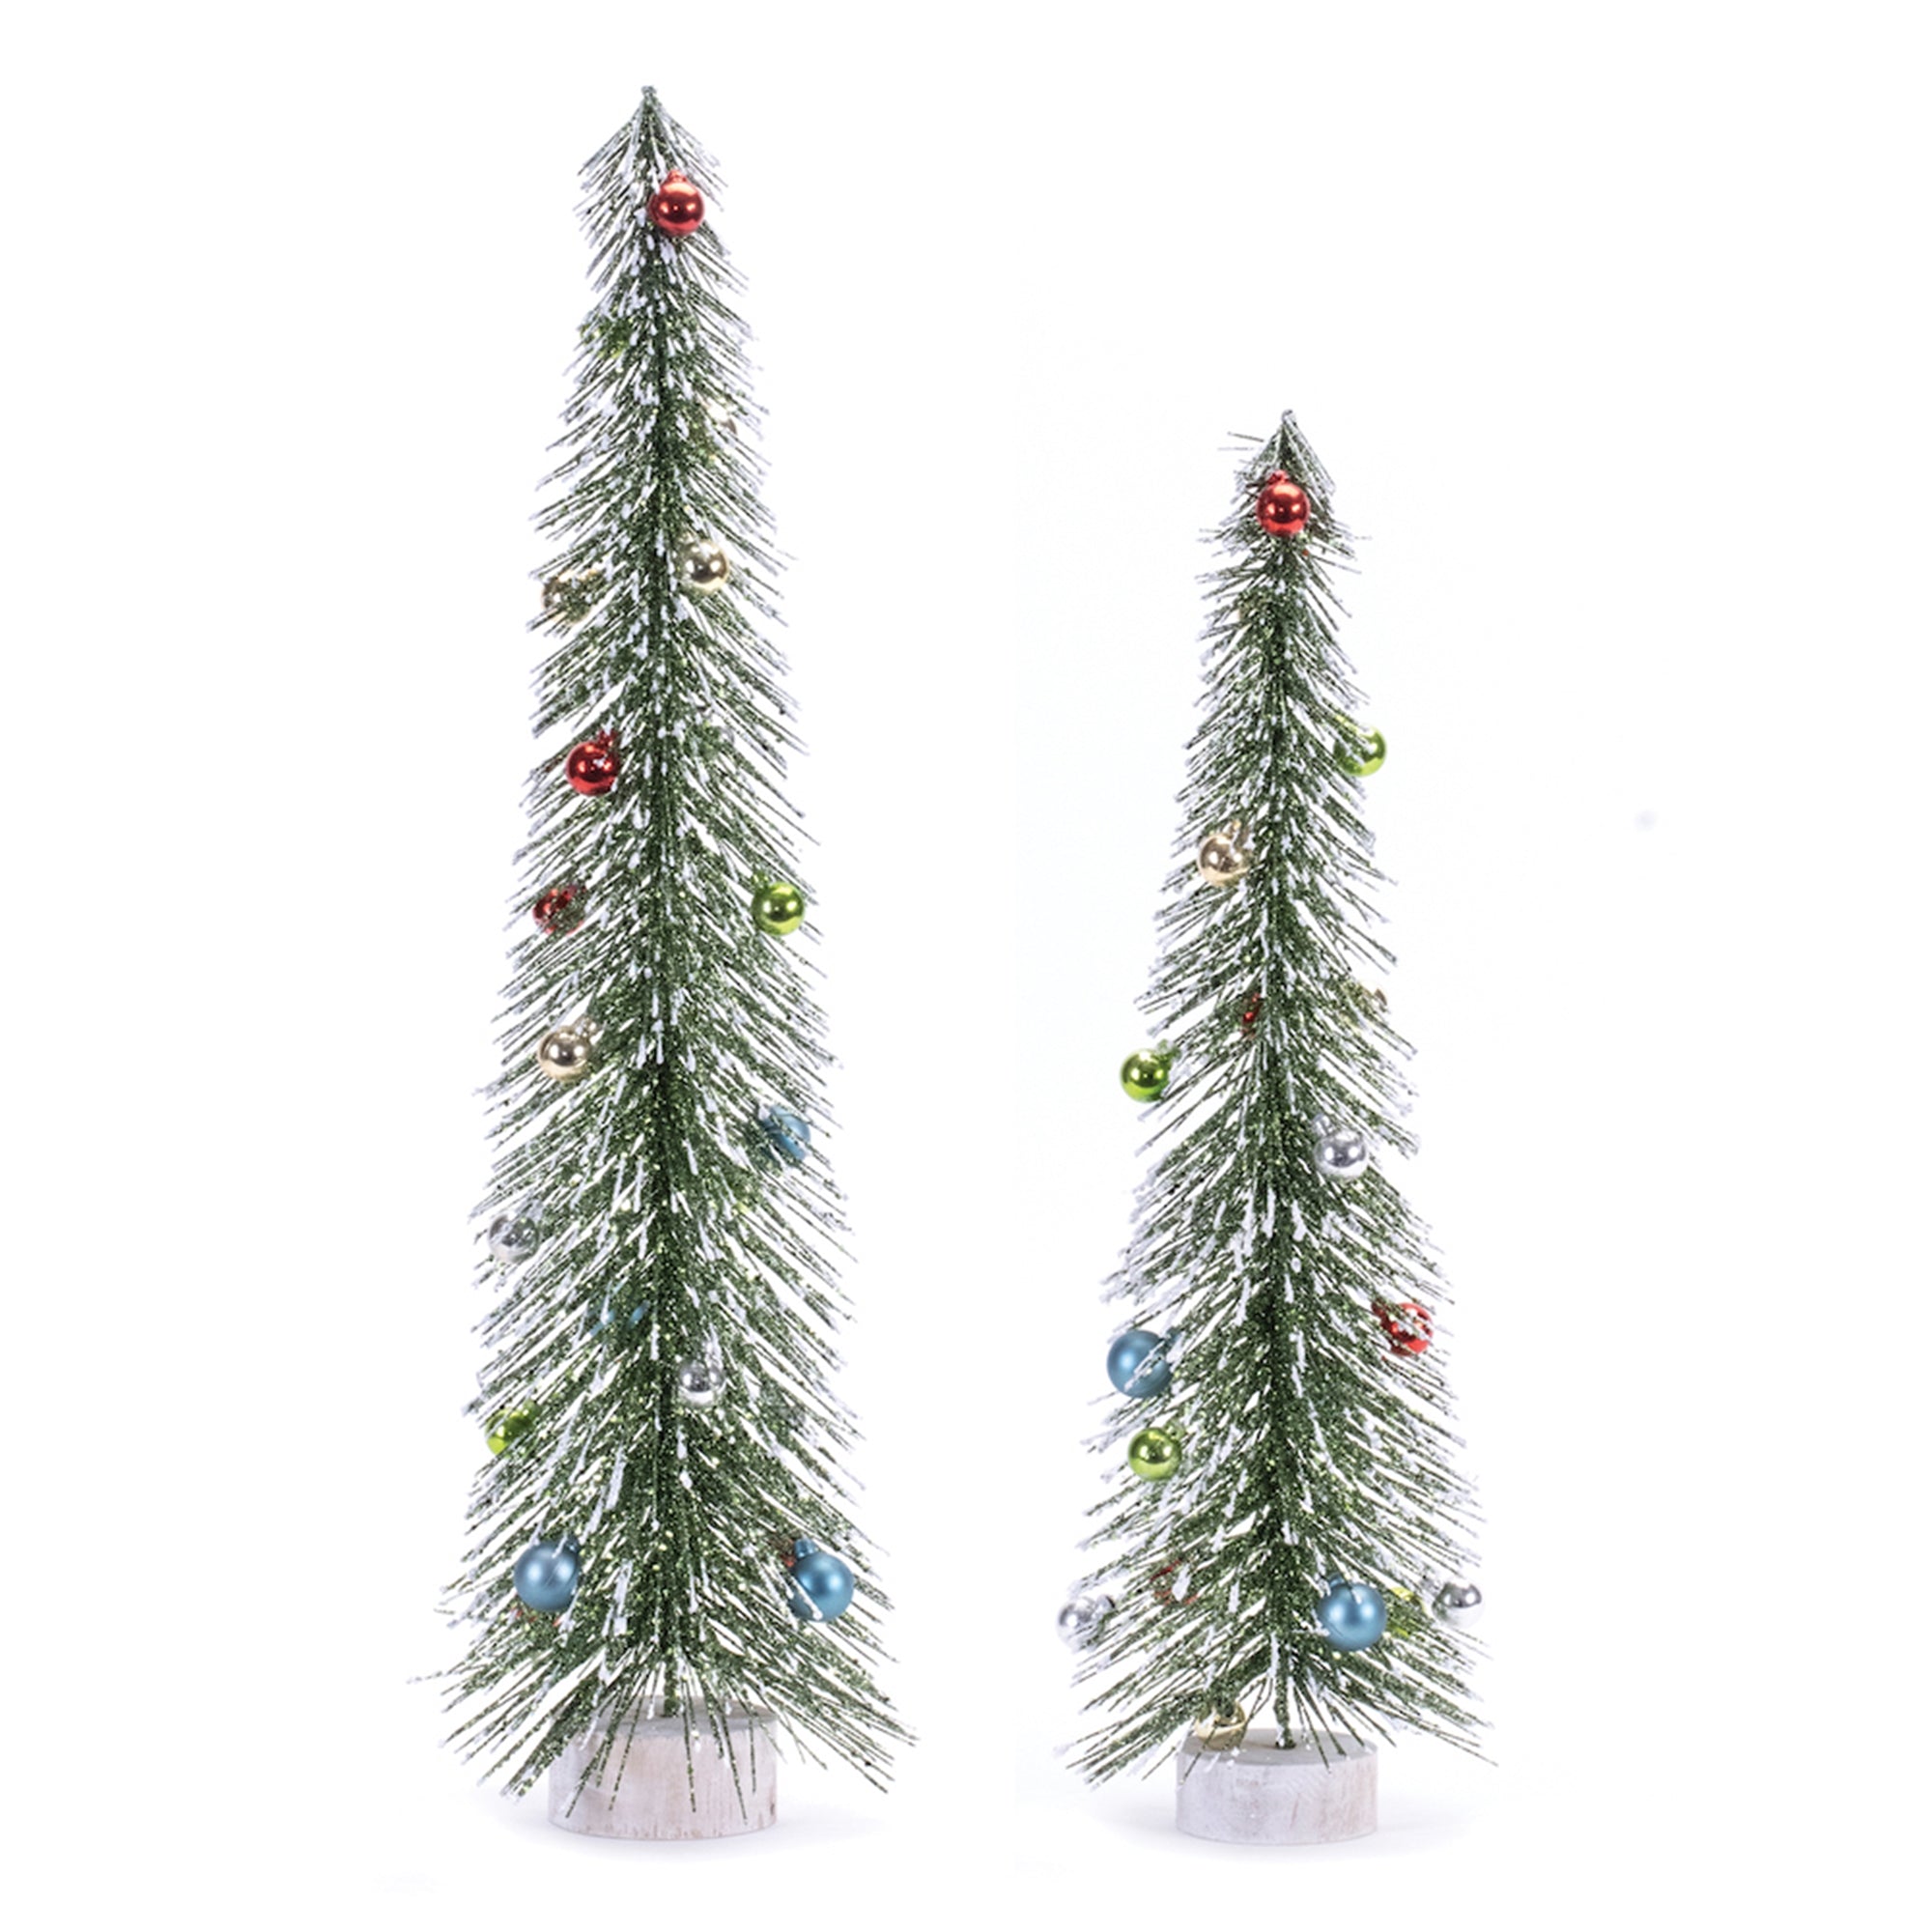 Glittered Bottle Brush Tree with Ornaments (Set of 2)